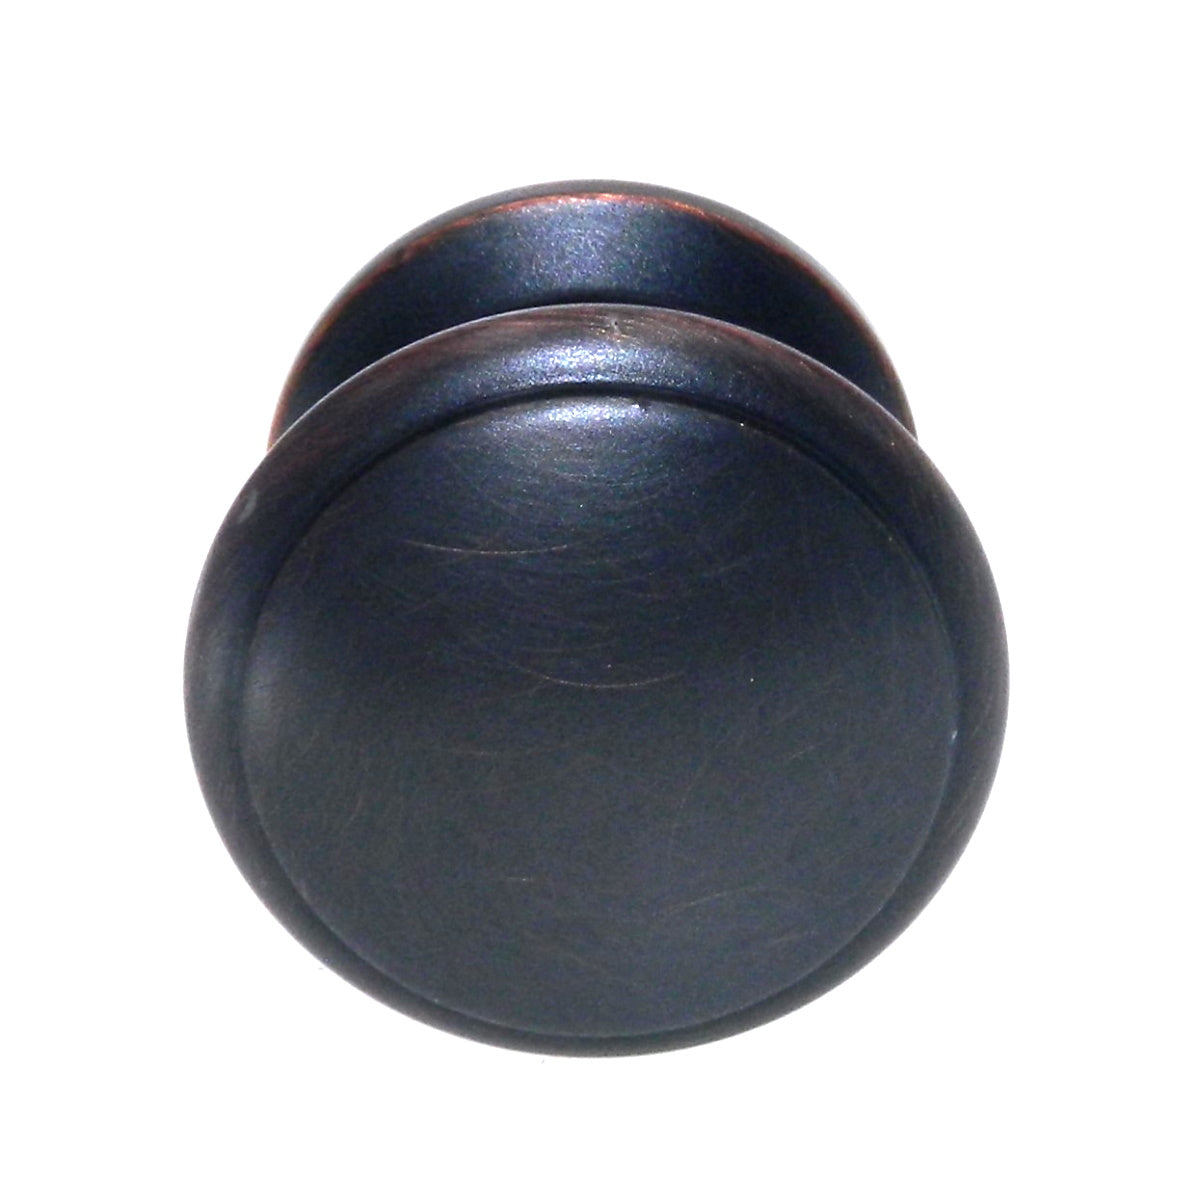 Amerock Hint of Heritage BP1466-ORB Oil-Rubbed Bronze Round 1 1/4" Cabinet Knob